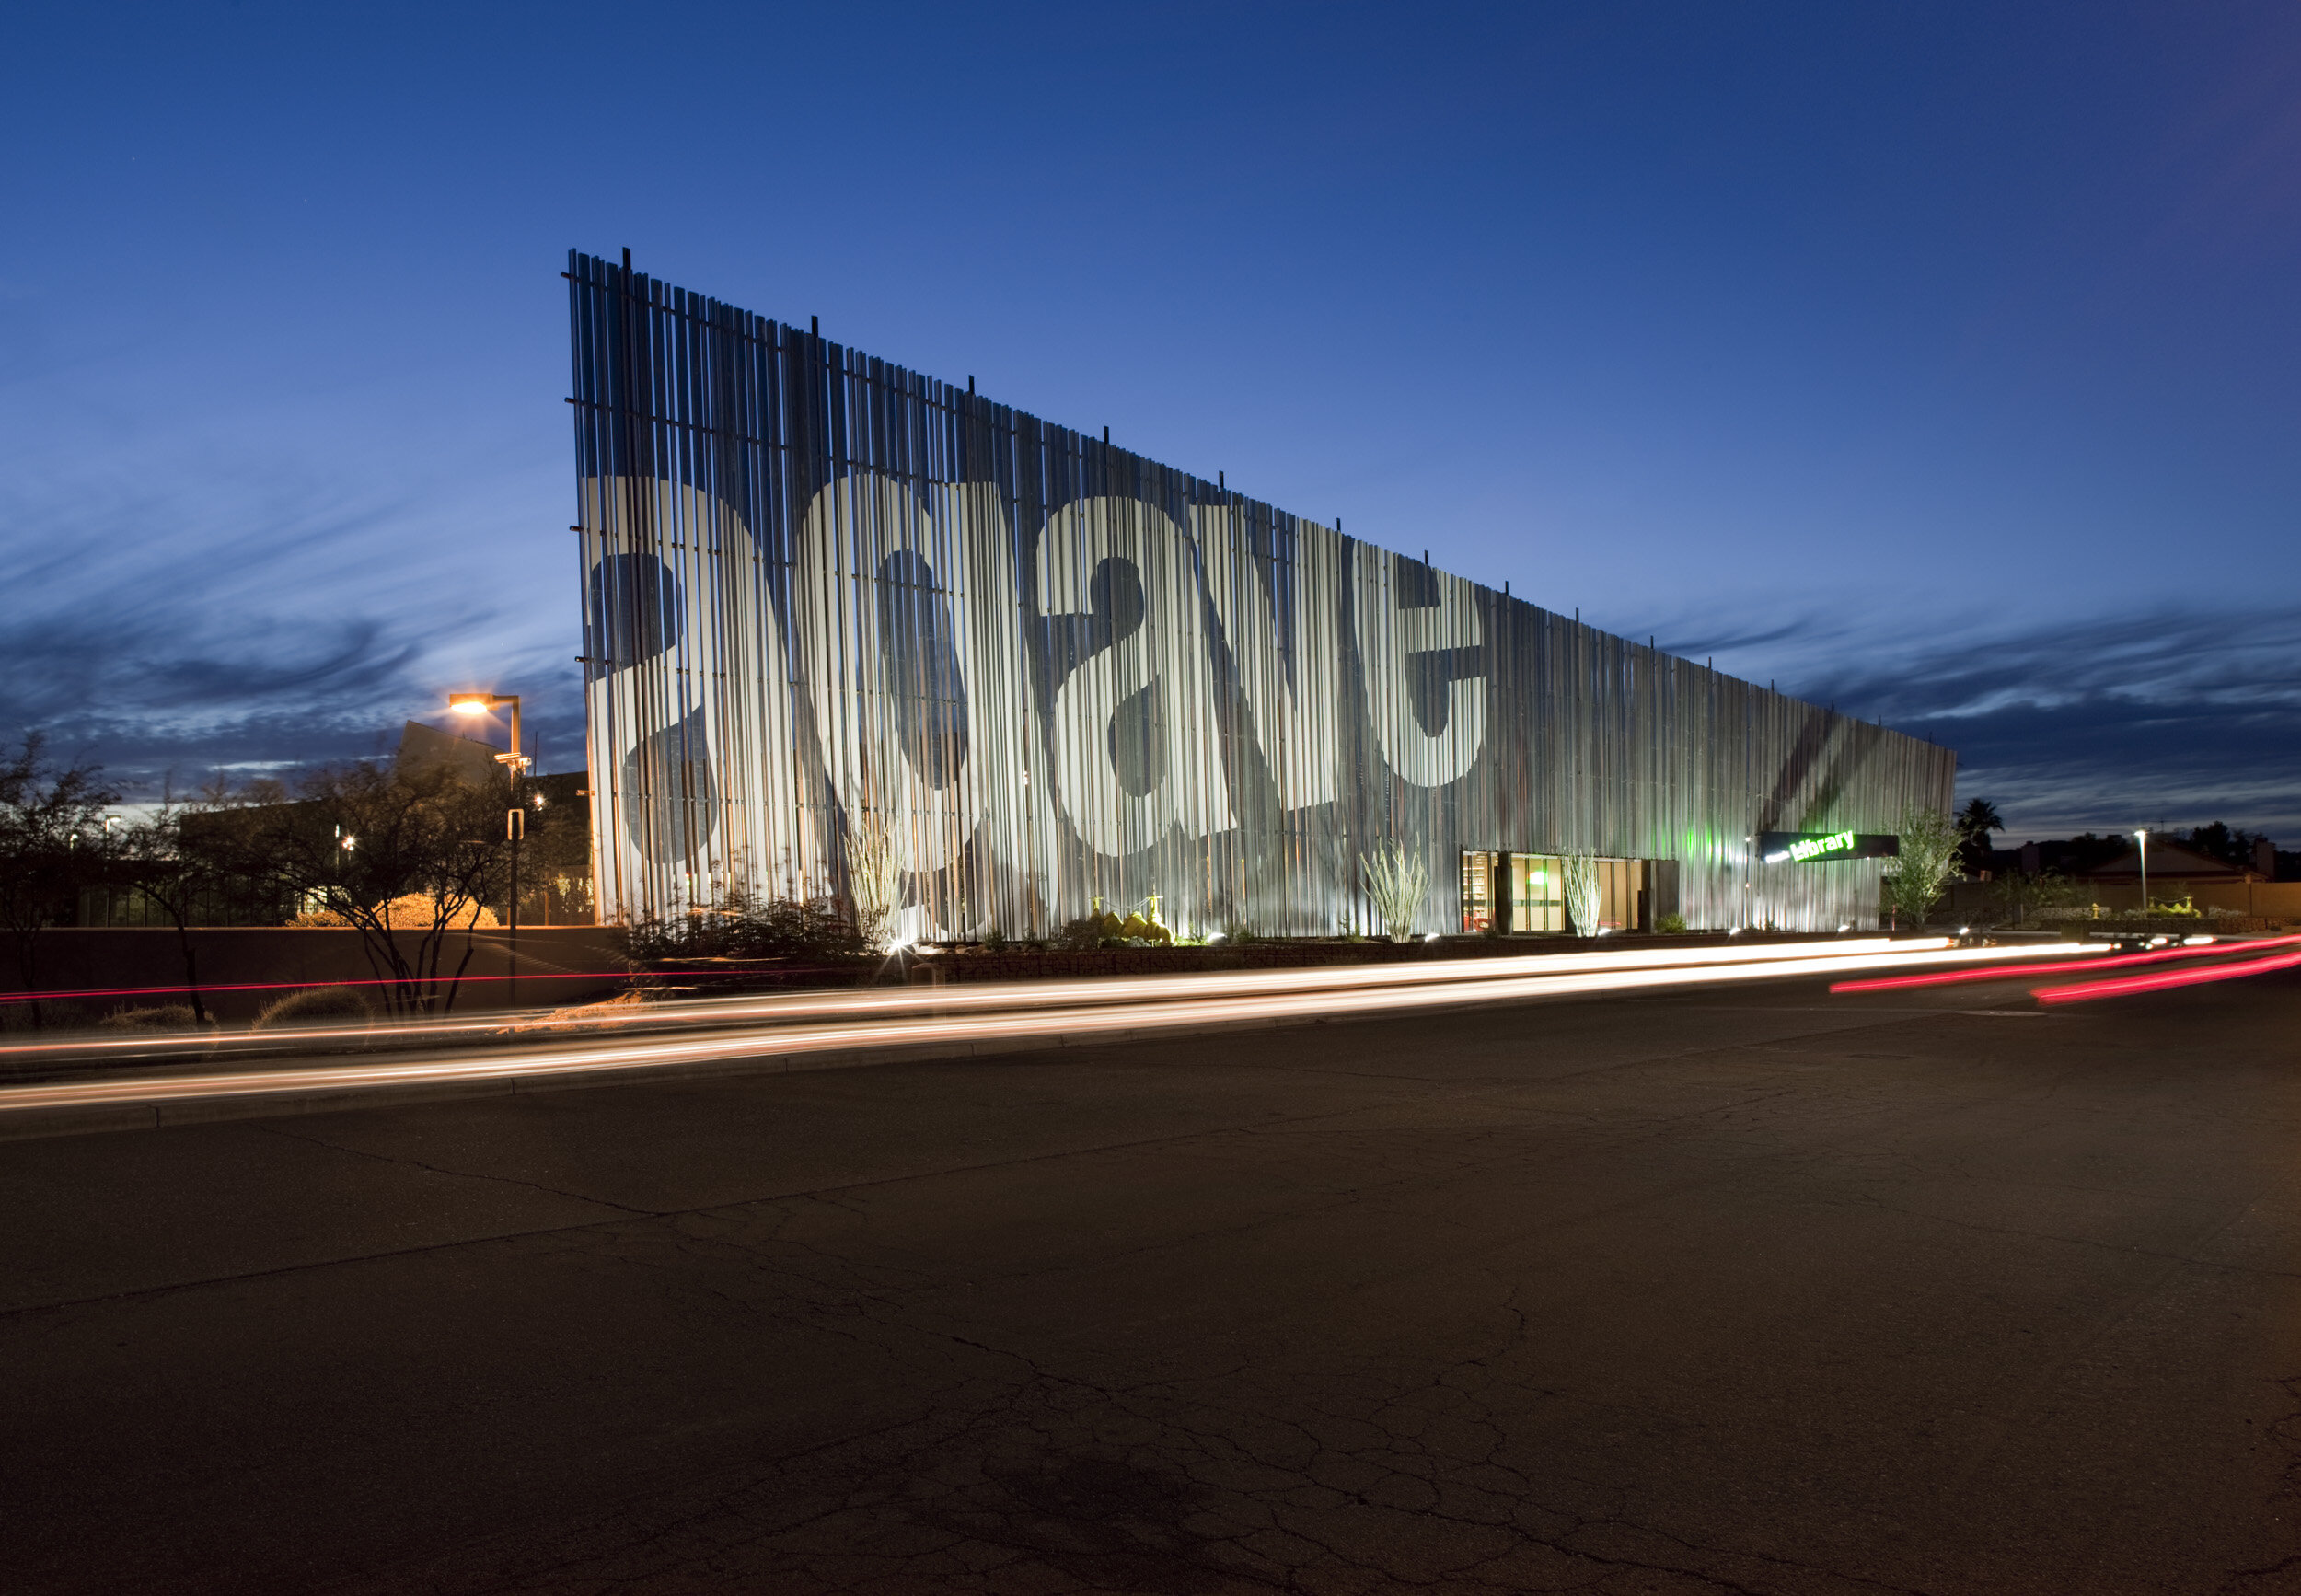 Agave Public Library